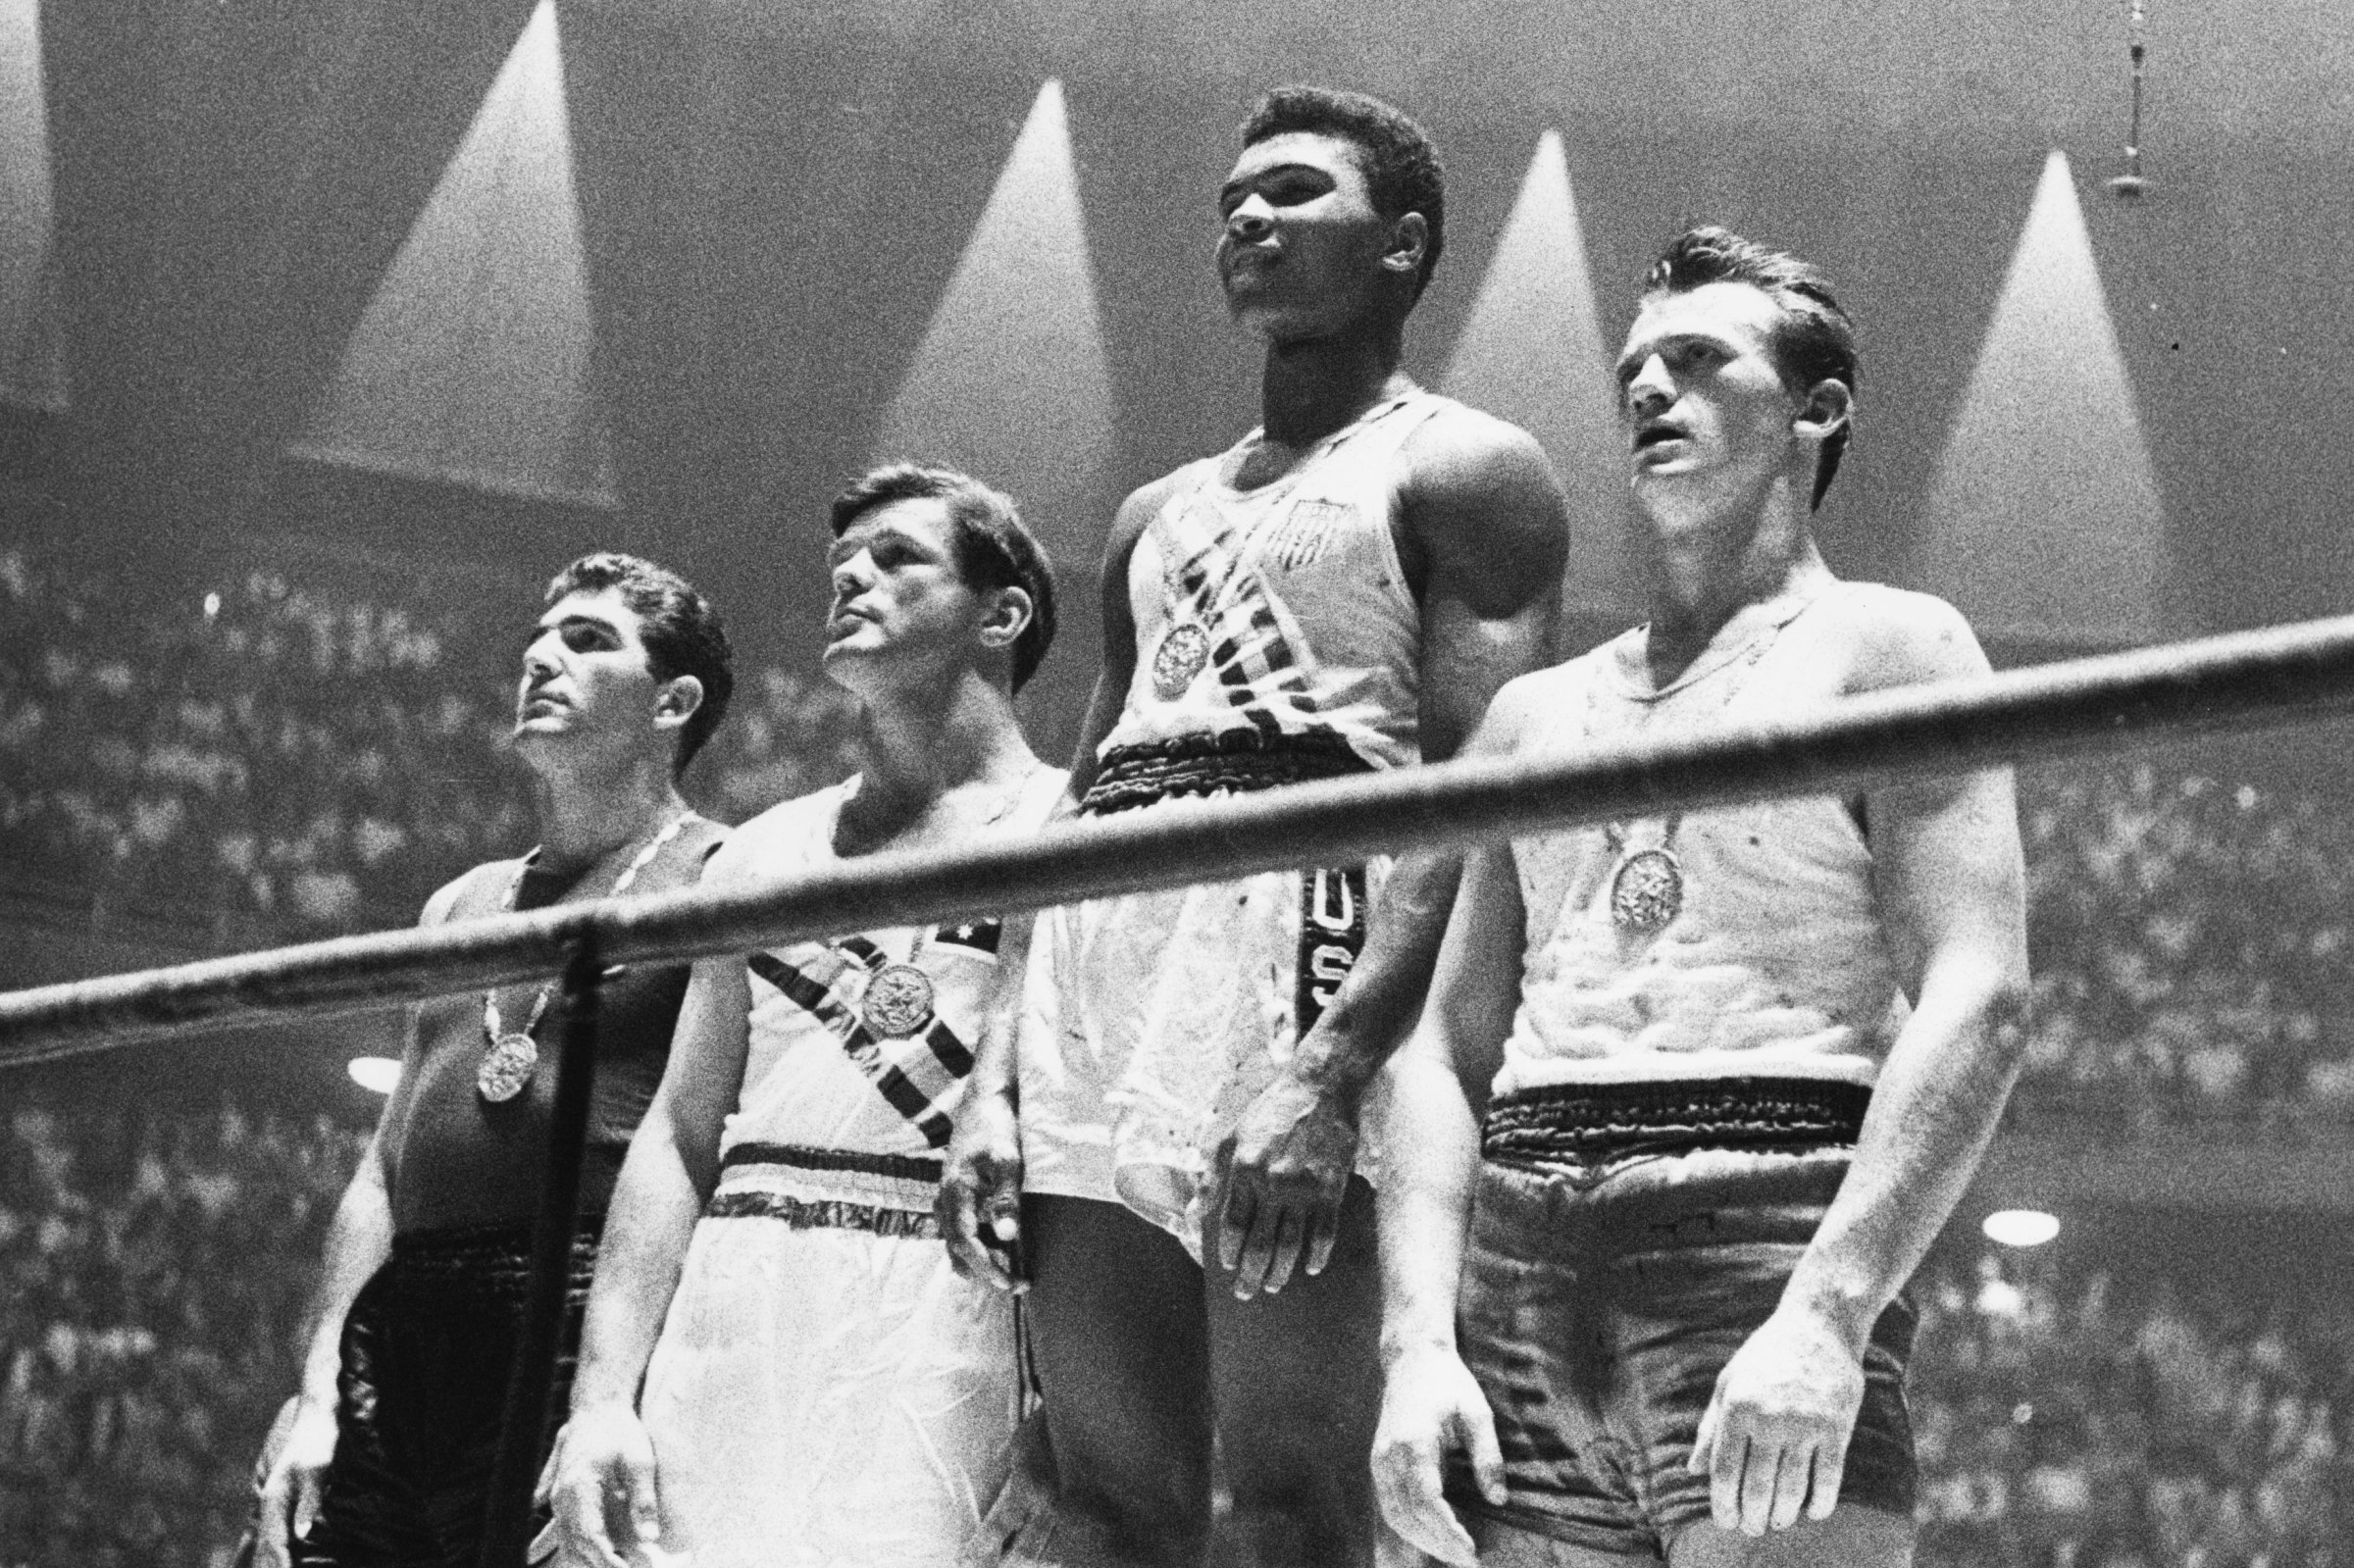 Muhammad Ali, second from right, and the winners of the 1960 Olympic medals for light heavyweight boxing on the winners' podium in Rome.